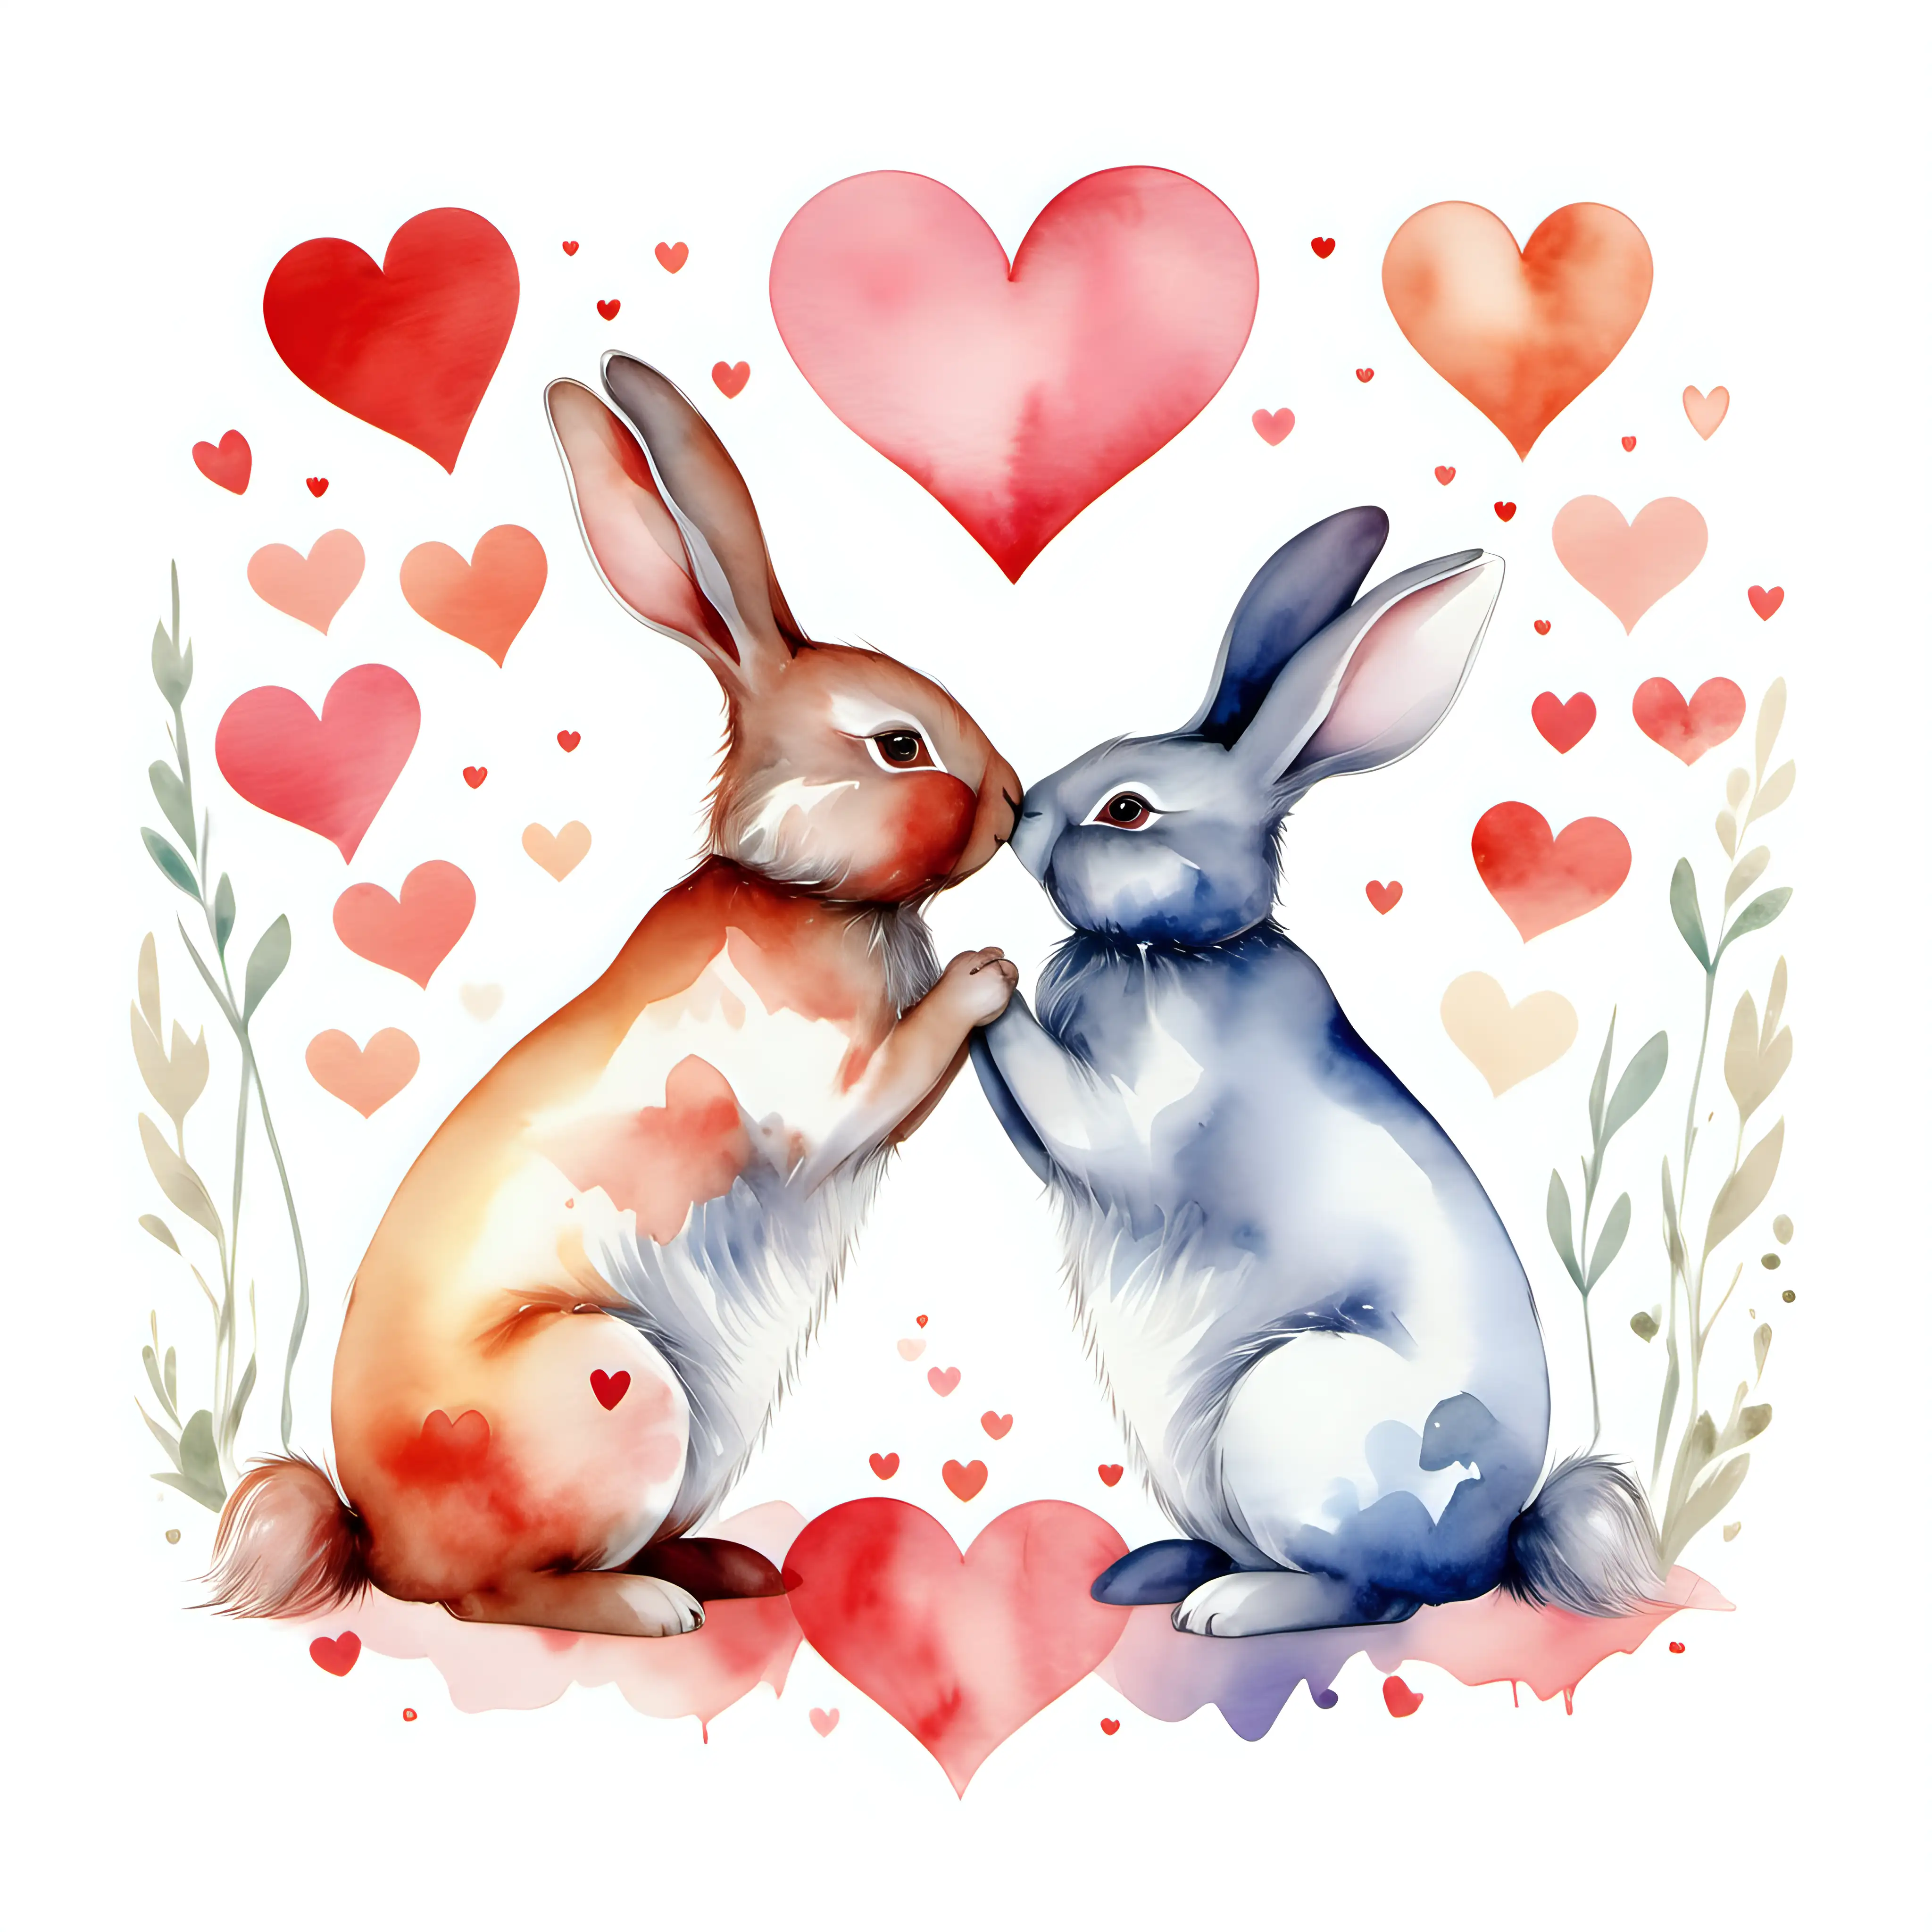 Heartwarming Watercolor Depiction of Rabbits Nuzzling in Love